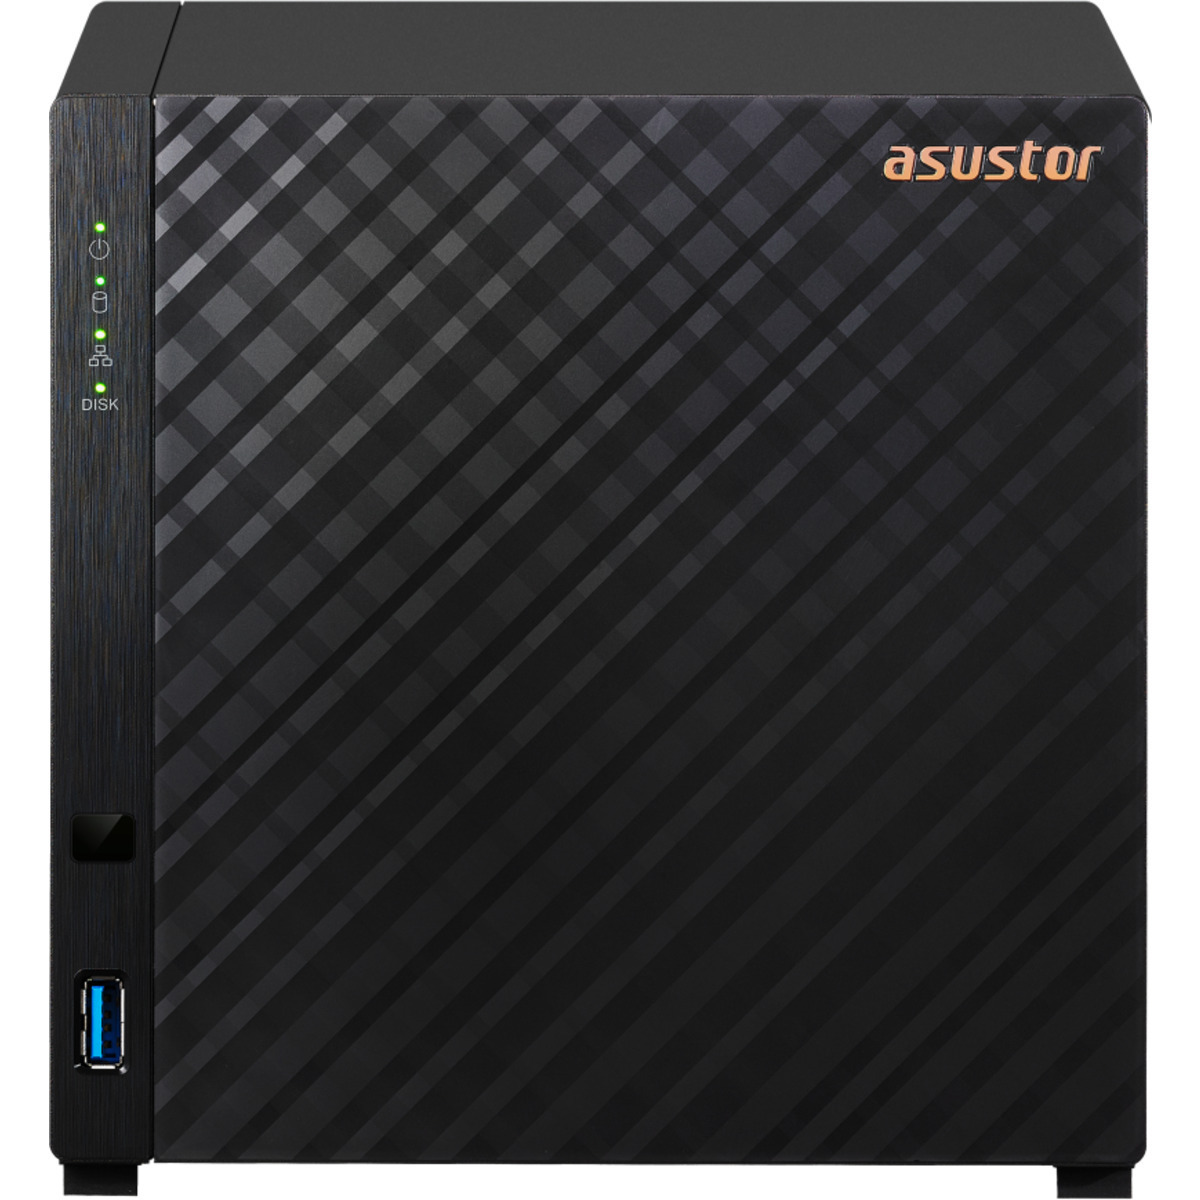 ASUSTOR DRIVESTOR 4 AS1104T 12tb 4-Bay Desktop Personal / Basic Home / Small Office NAS - Network Attached Storage Device 3x4tb Seagate IronWolf Pro ST4000NT001 3.5 7200rpm SATA 6Gb/s HDD NAS Class Drives Installed - Burn-In Tested DRIVESTOR 4 AS1104T